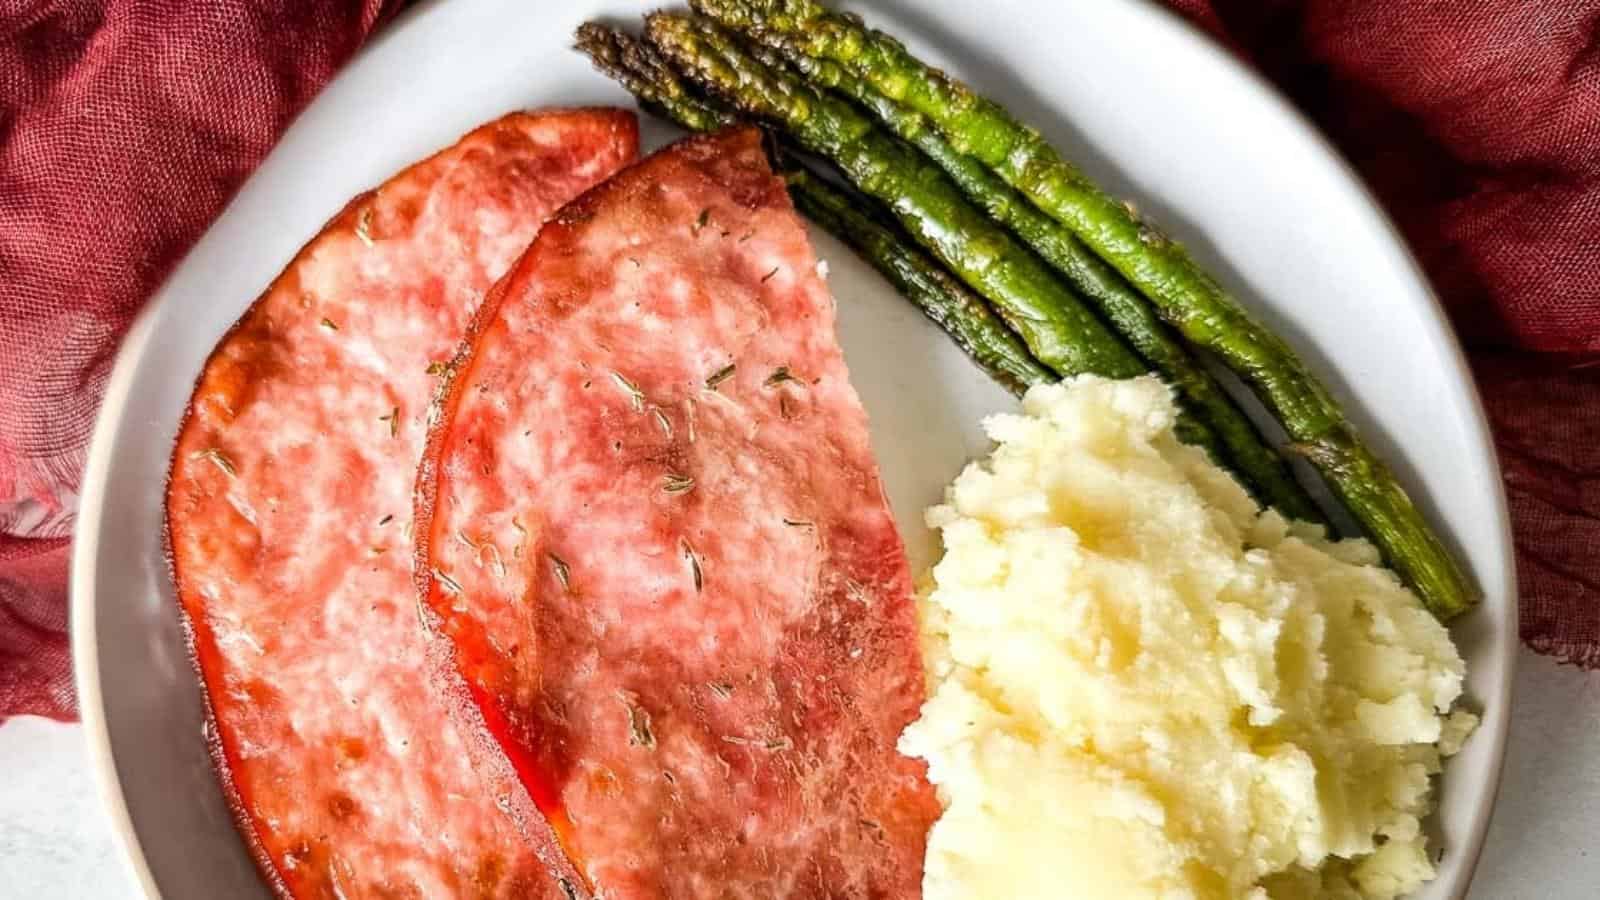 air fryer ham steak on a white plate with asparagus and mashed potatoes.